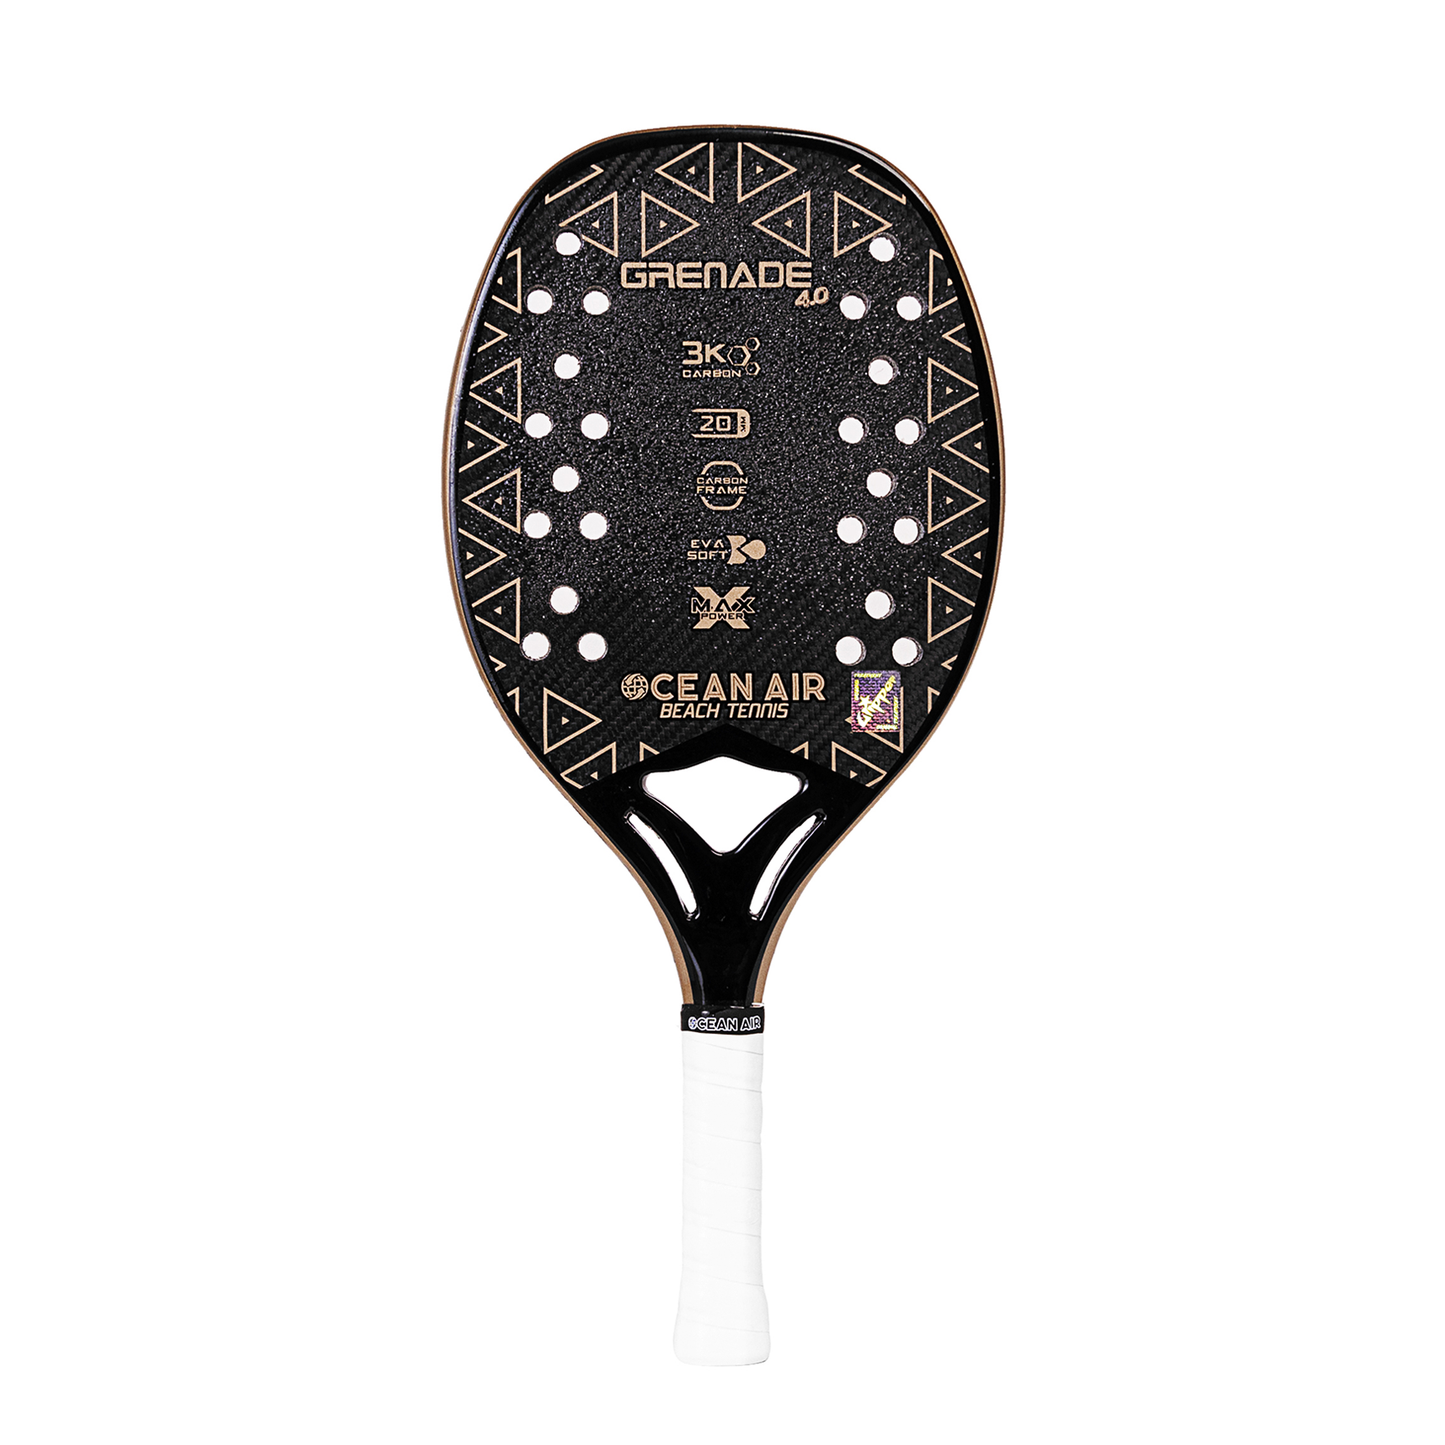 2022 GRENADE 4.0 ARENA LIMITED EDITION WITH GLIPPER TREATMENT